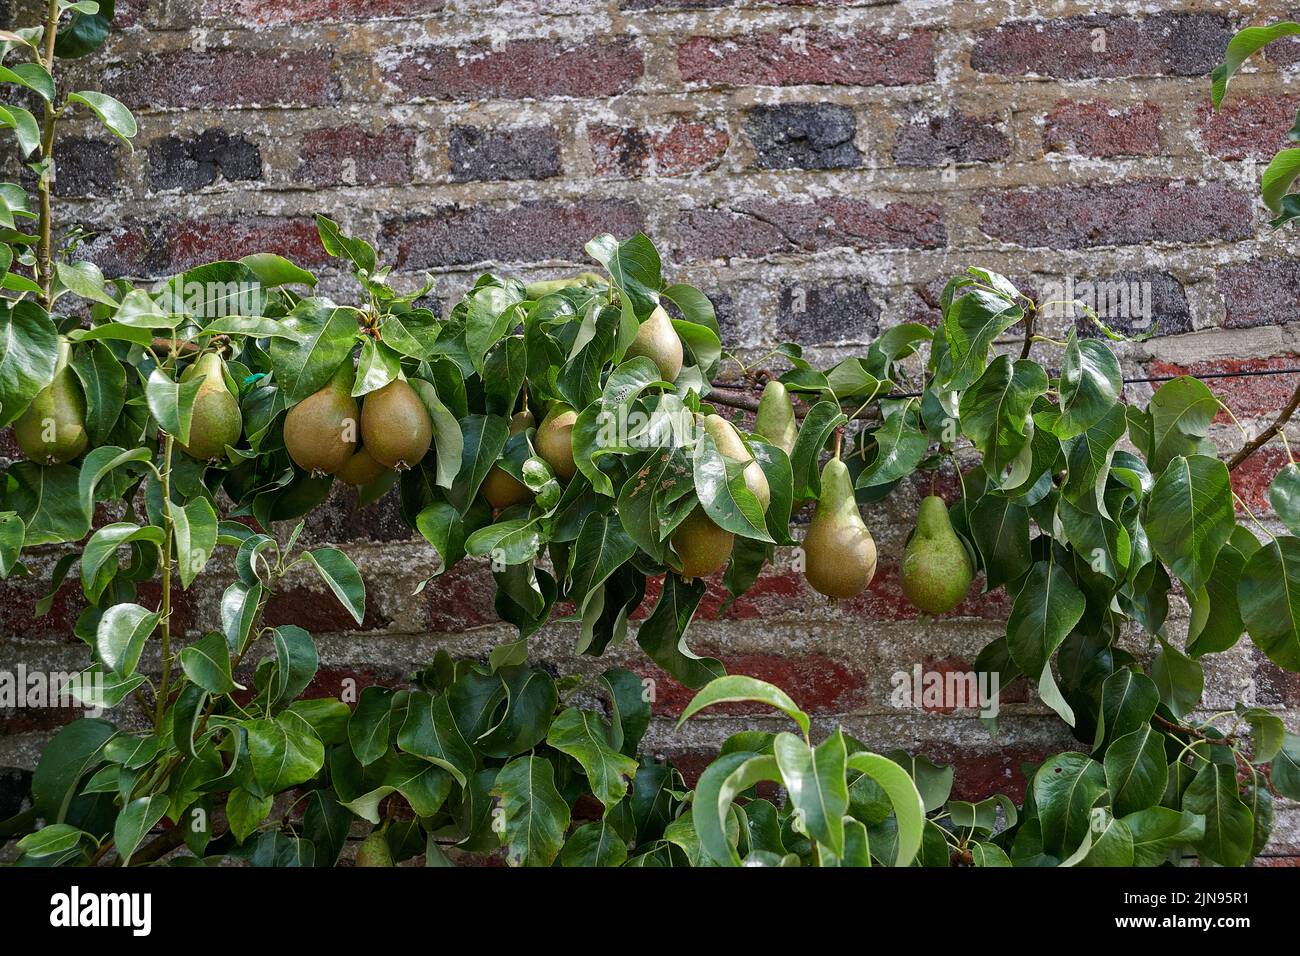 Comice pears (properly Doyenne du Comice) growing in a walled garden summer in East Yorkshire, England, UK, GB. Stock Photo